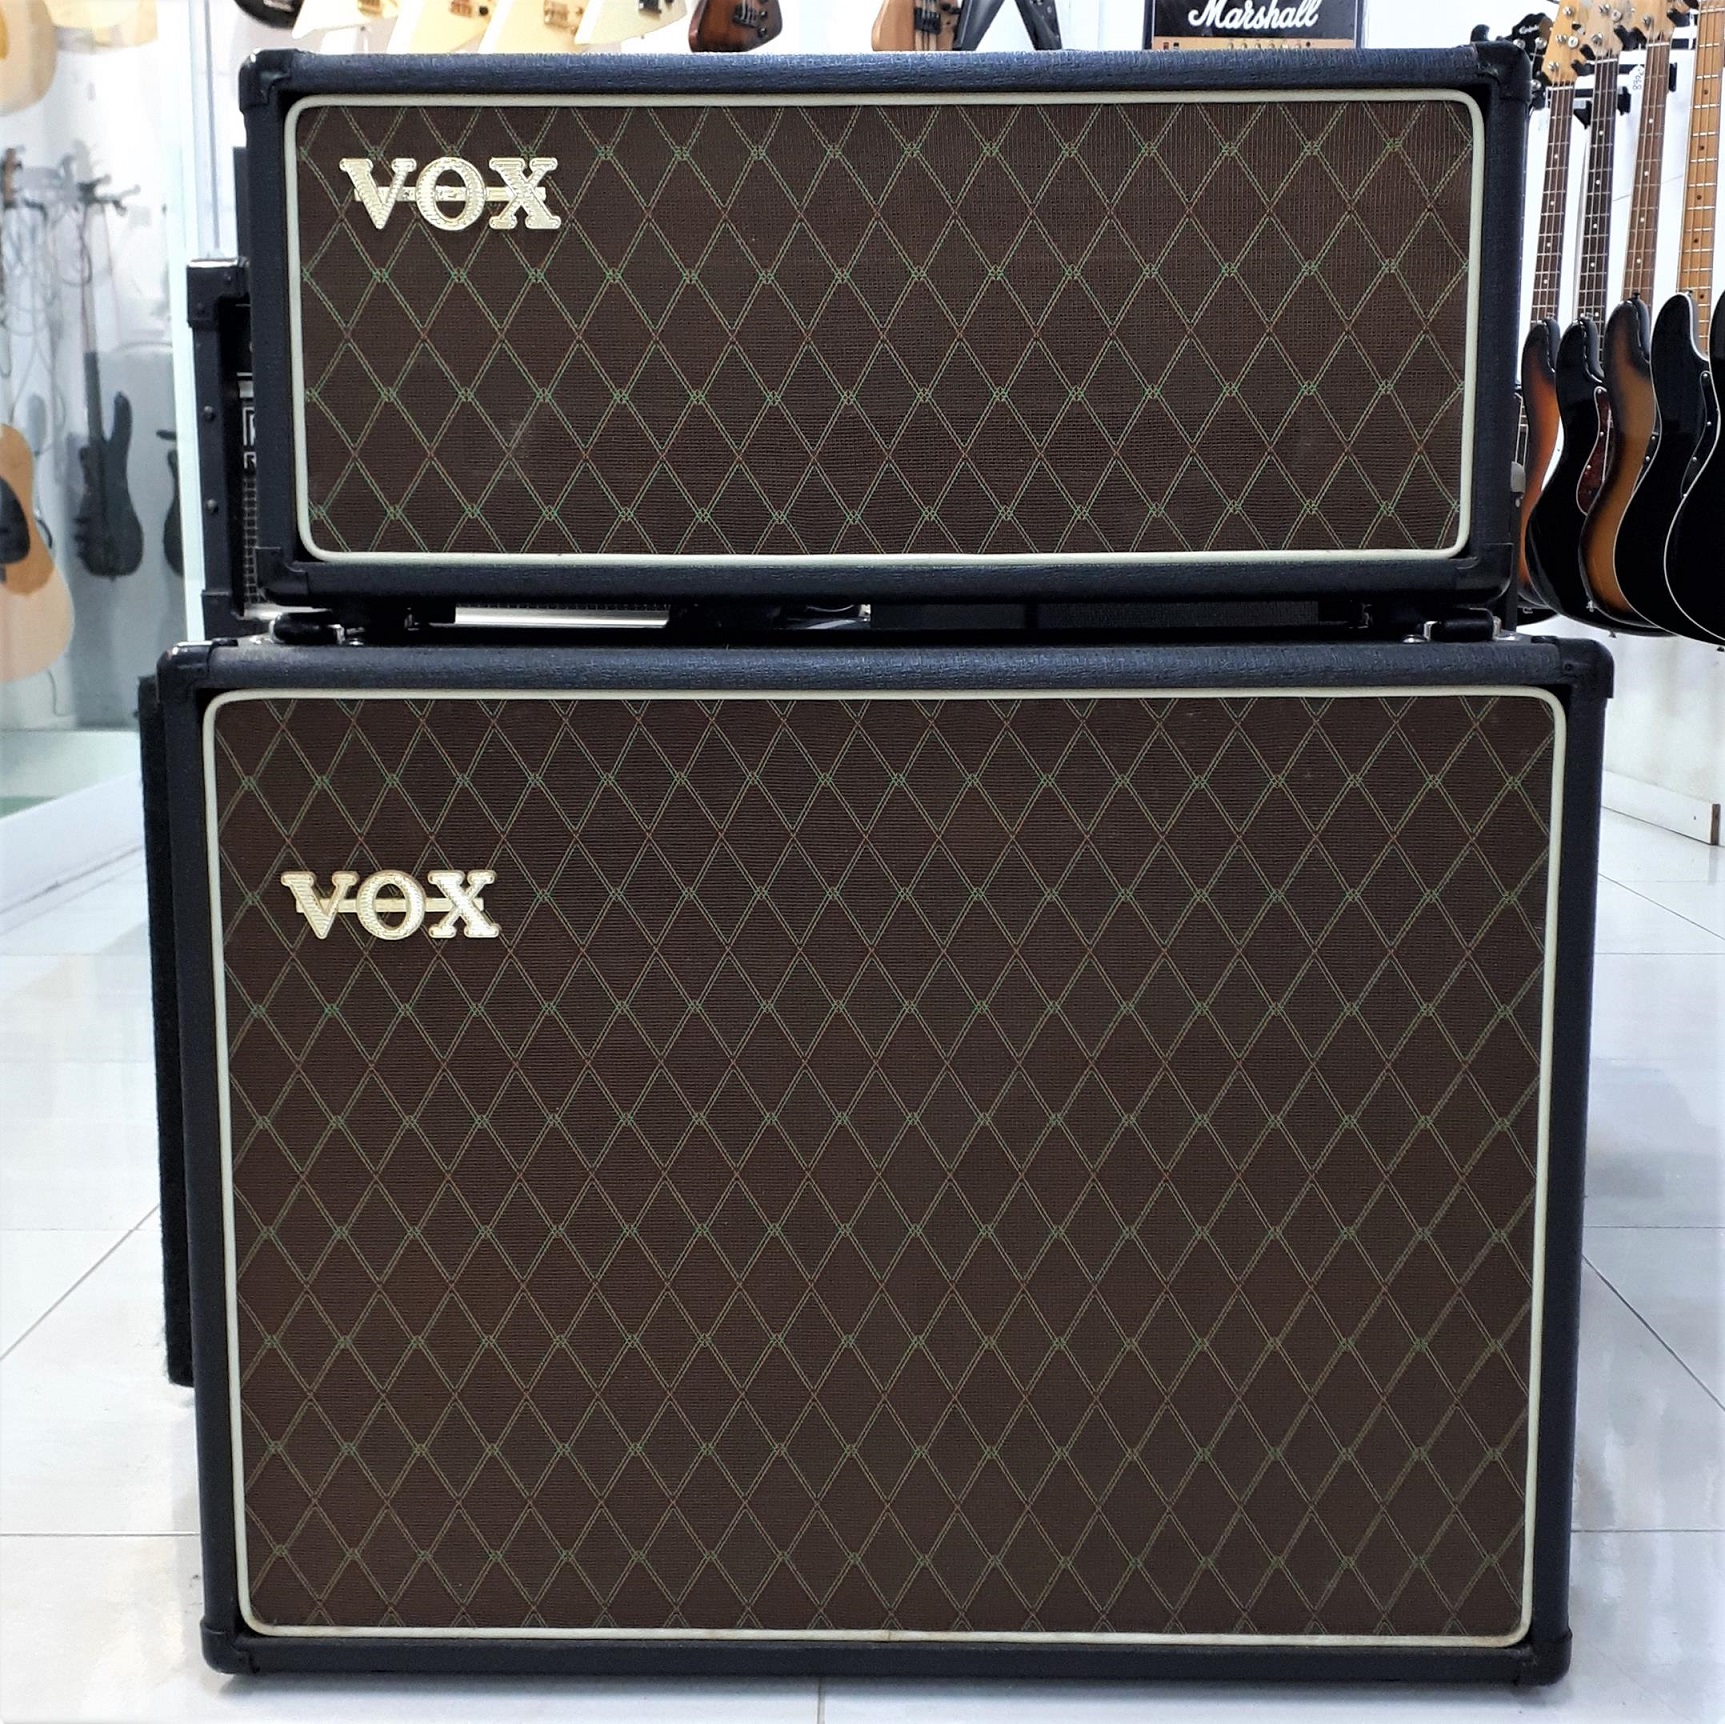 Vox Ac30cch 212 Cabinet Guitar